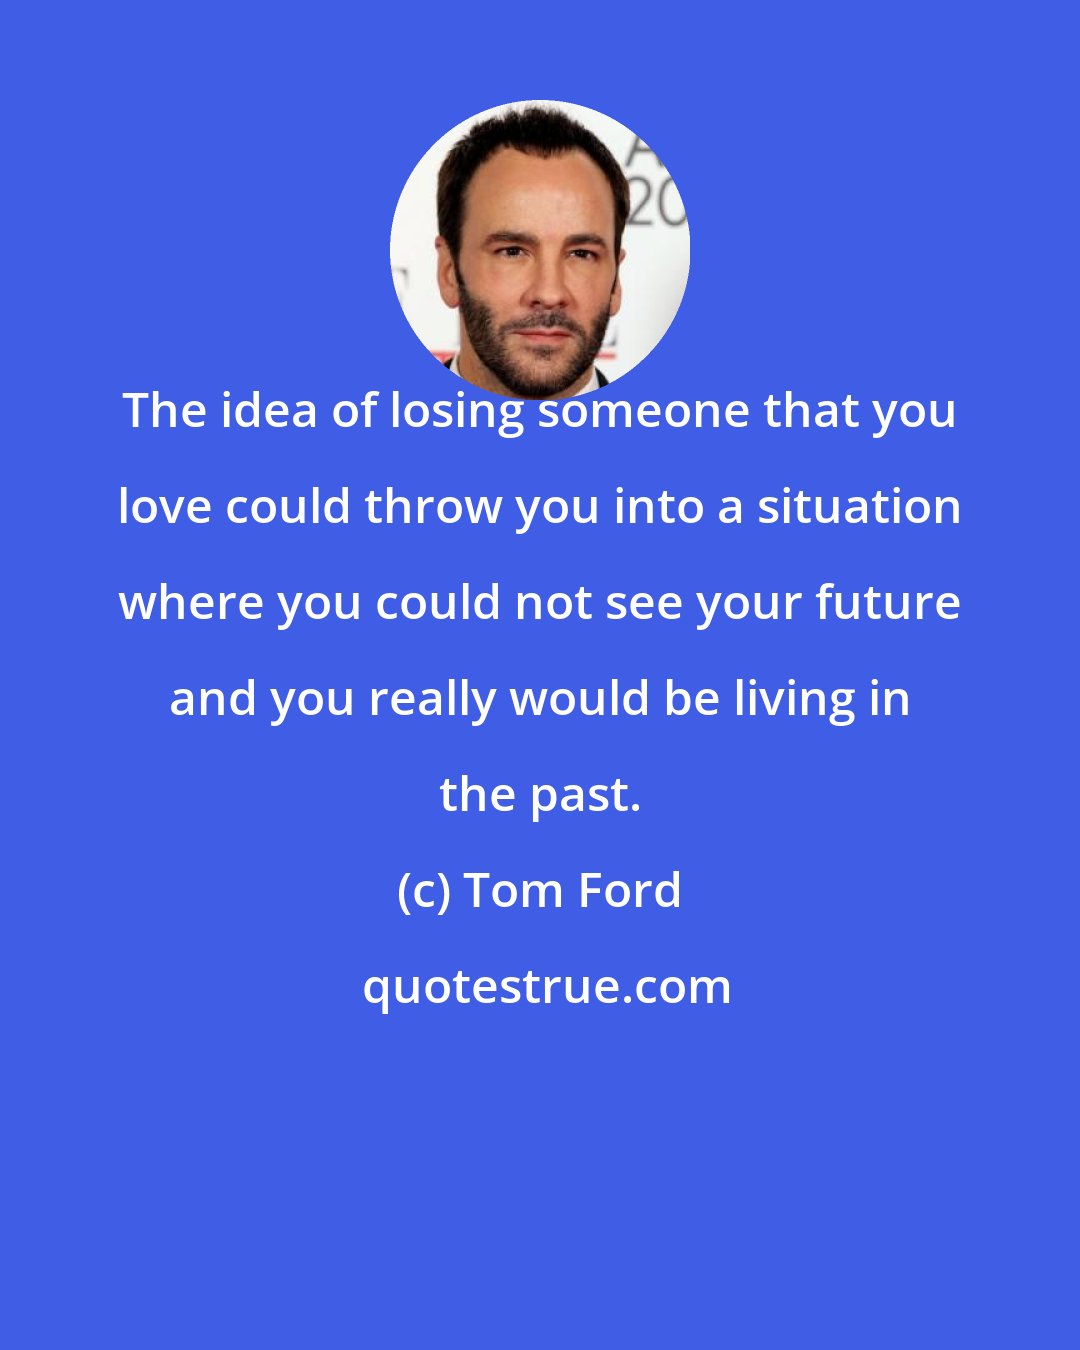 Tom Ford: The idea of losing someone that you love could throw you into a situation where you could not see your future and you really would be living in the past.